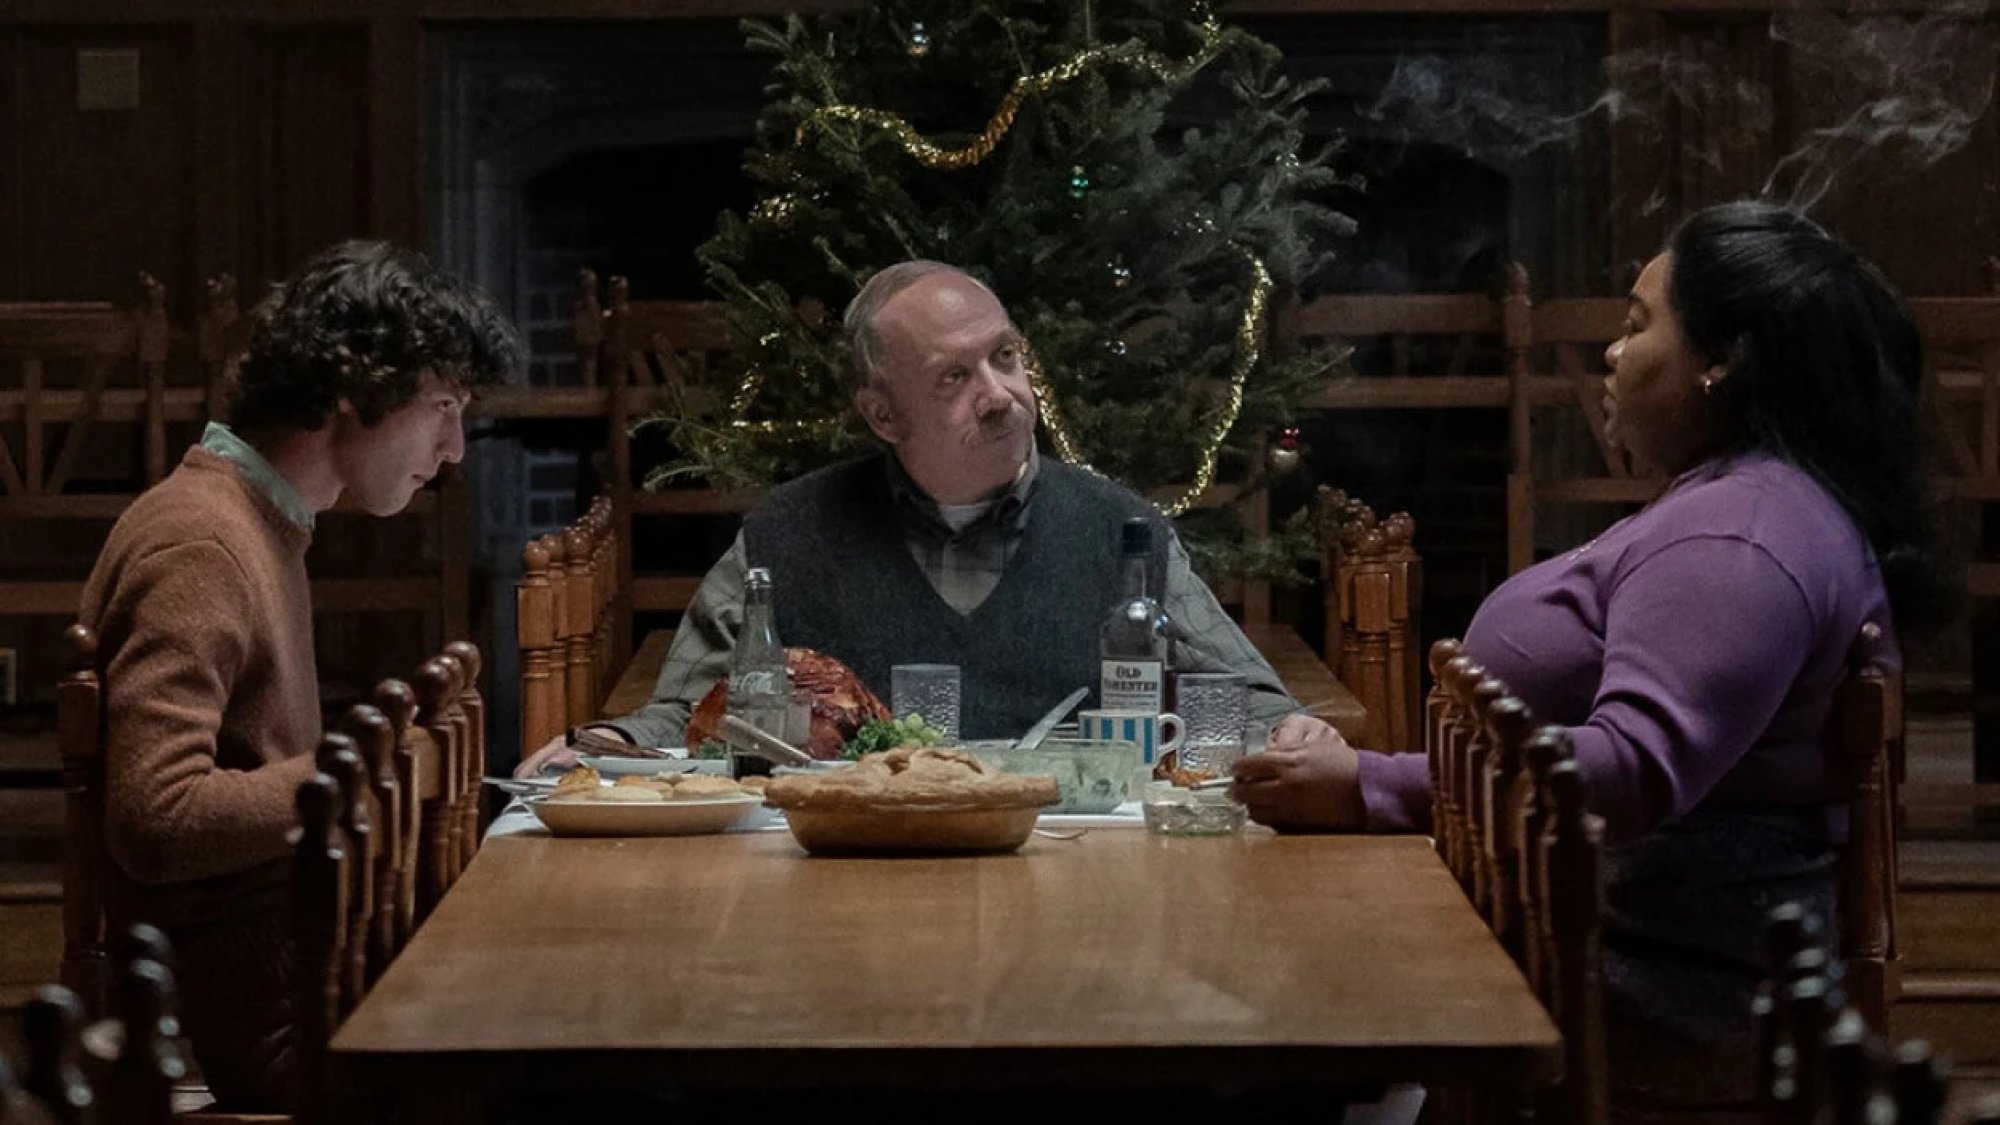 Three people eat dinner at a long table in front of a Christmas tree.